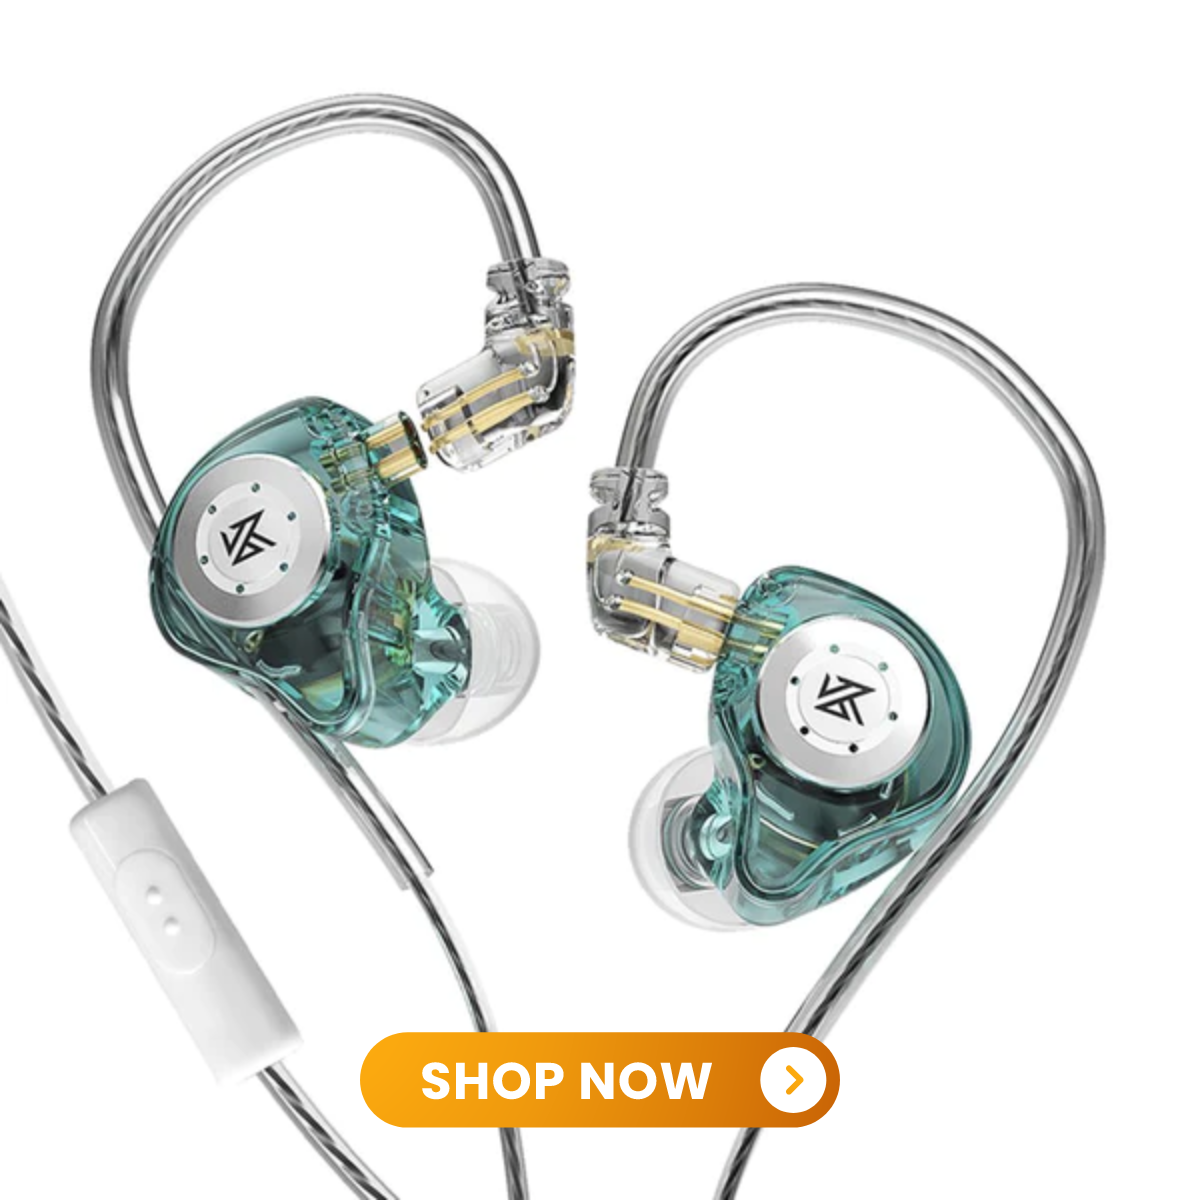  CCA CRA in Ear Monitor Headphones, Ultra-Thin Diaphragm Dynamic  Driver IEM Earphones, Clear Sound & Deep Bass, Wired Earbuds with  Tangle-Free Detachable Cable : Electronics